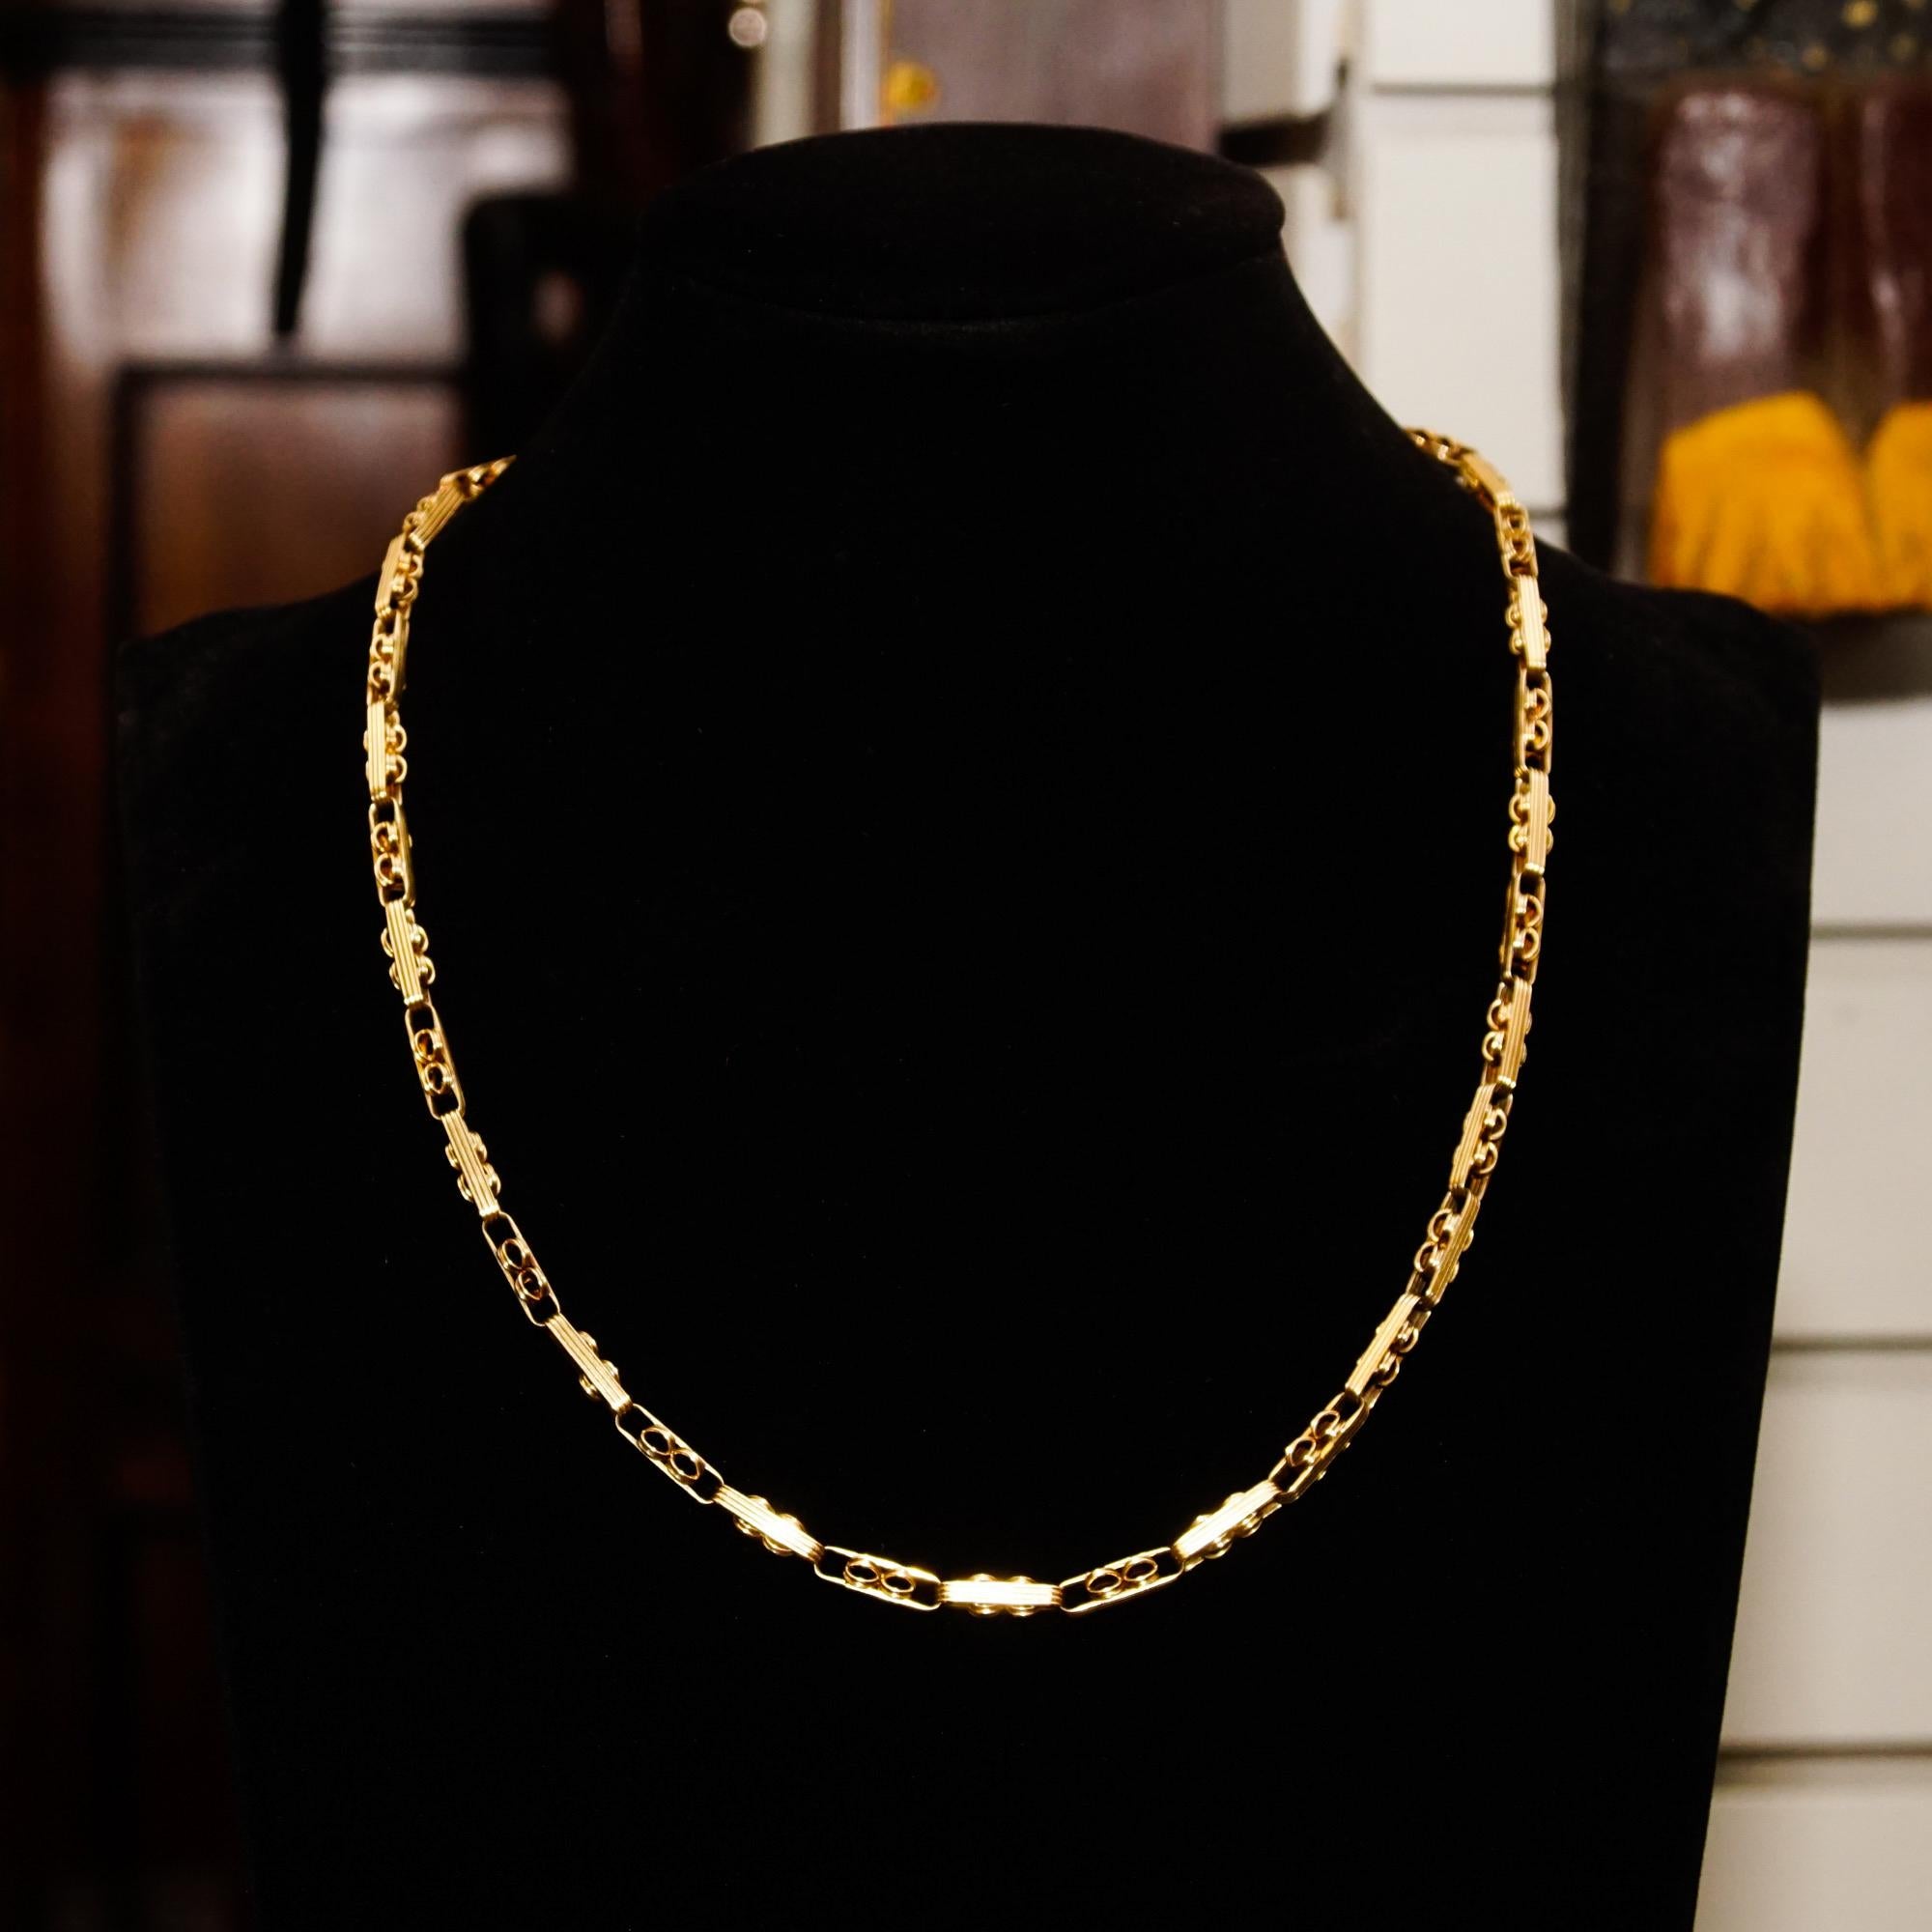 An incredibly well-preserved antique 14k fancy link chain necklace, originally a ladies pocket watch accessories. Features a 4mm wide infinity link pattern with ridged details and a rounded bead style decoration. The chain measures 19 inches long